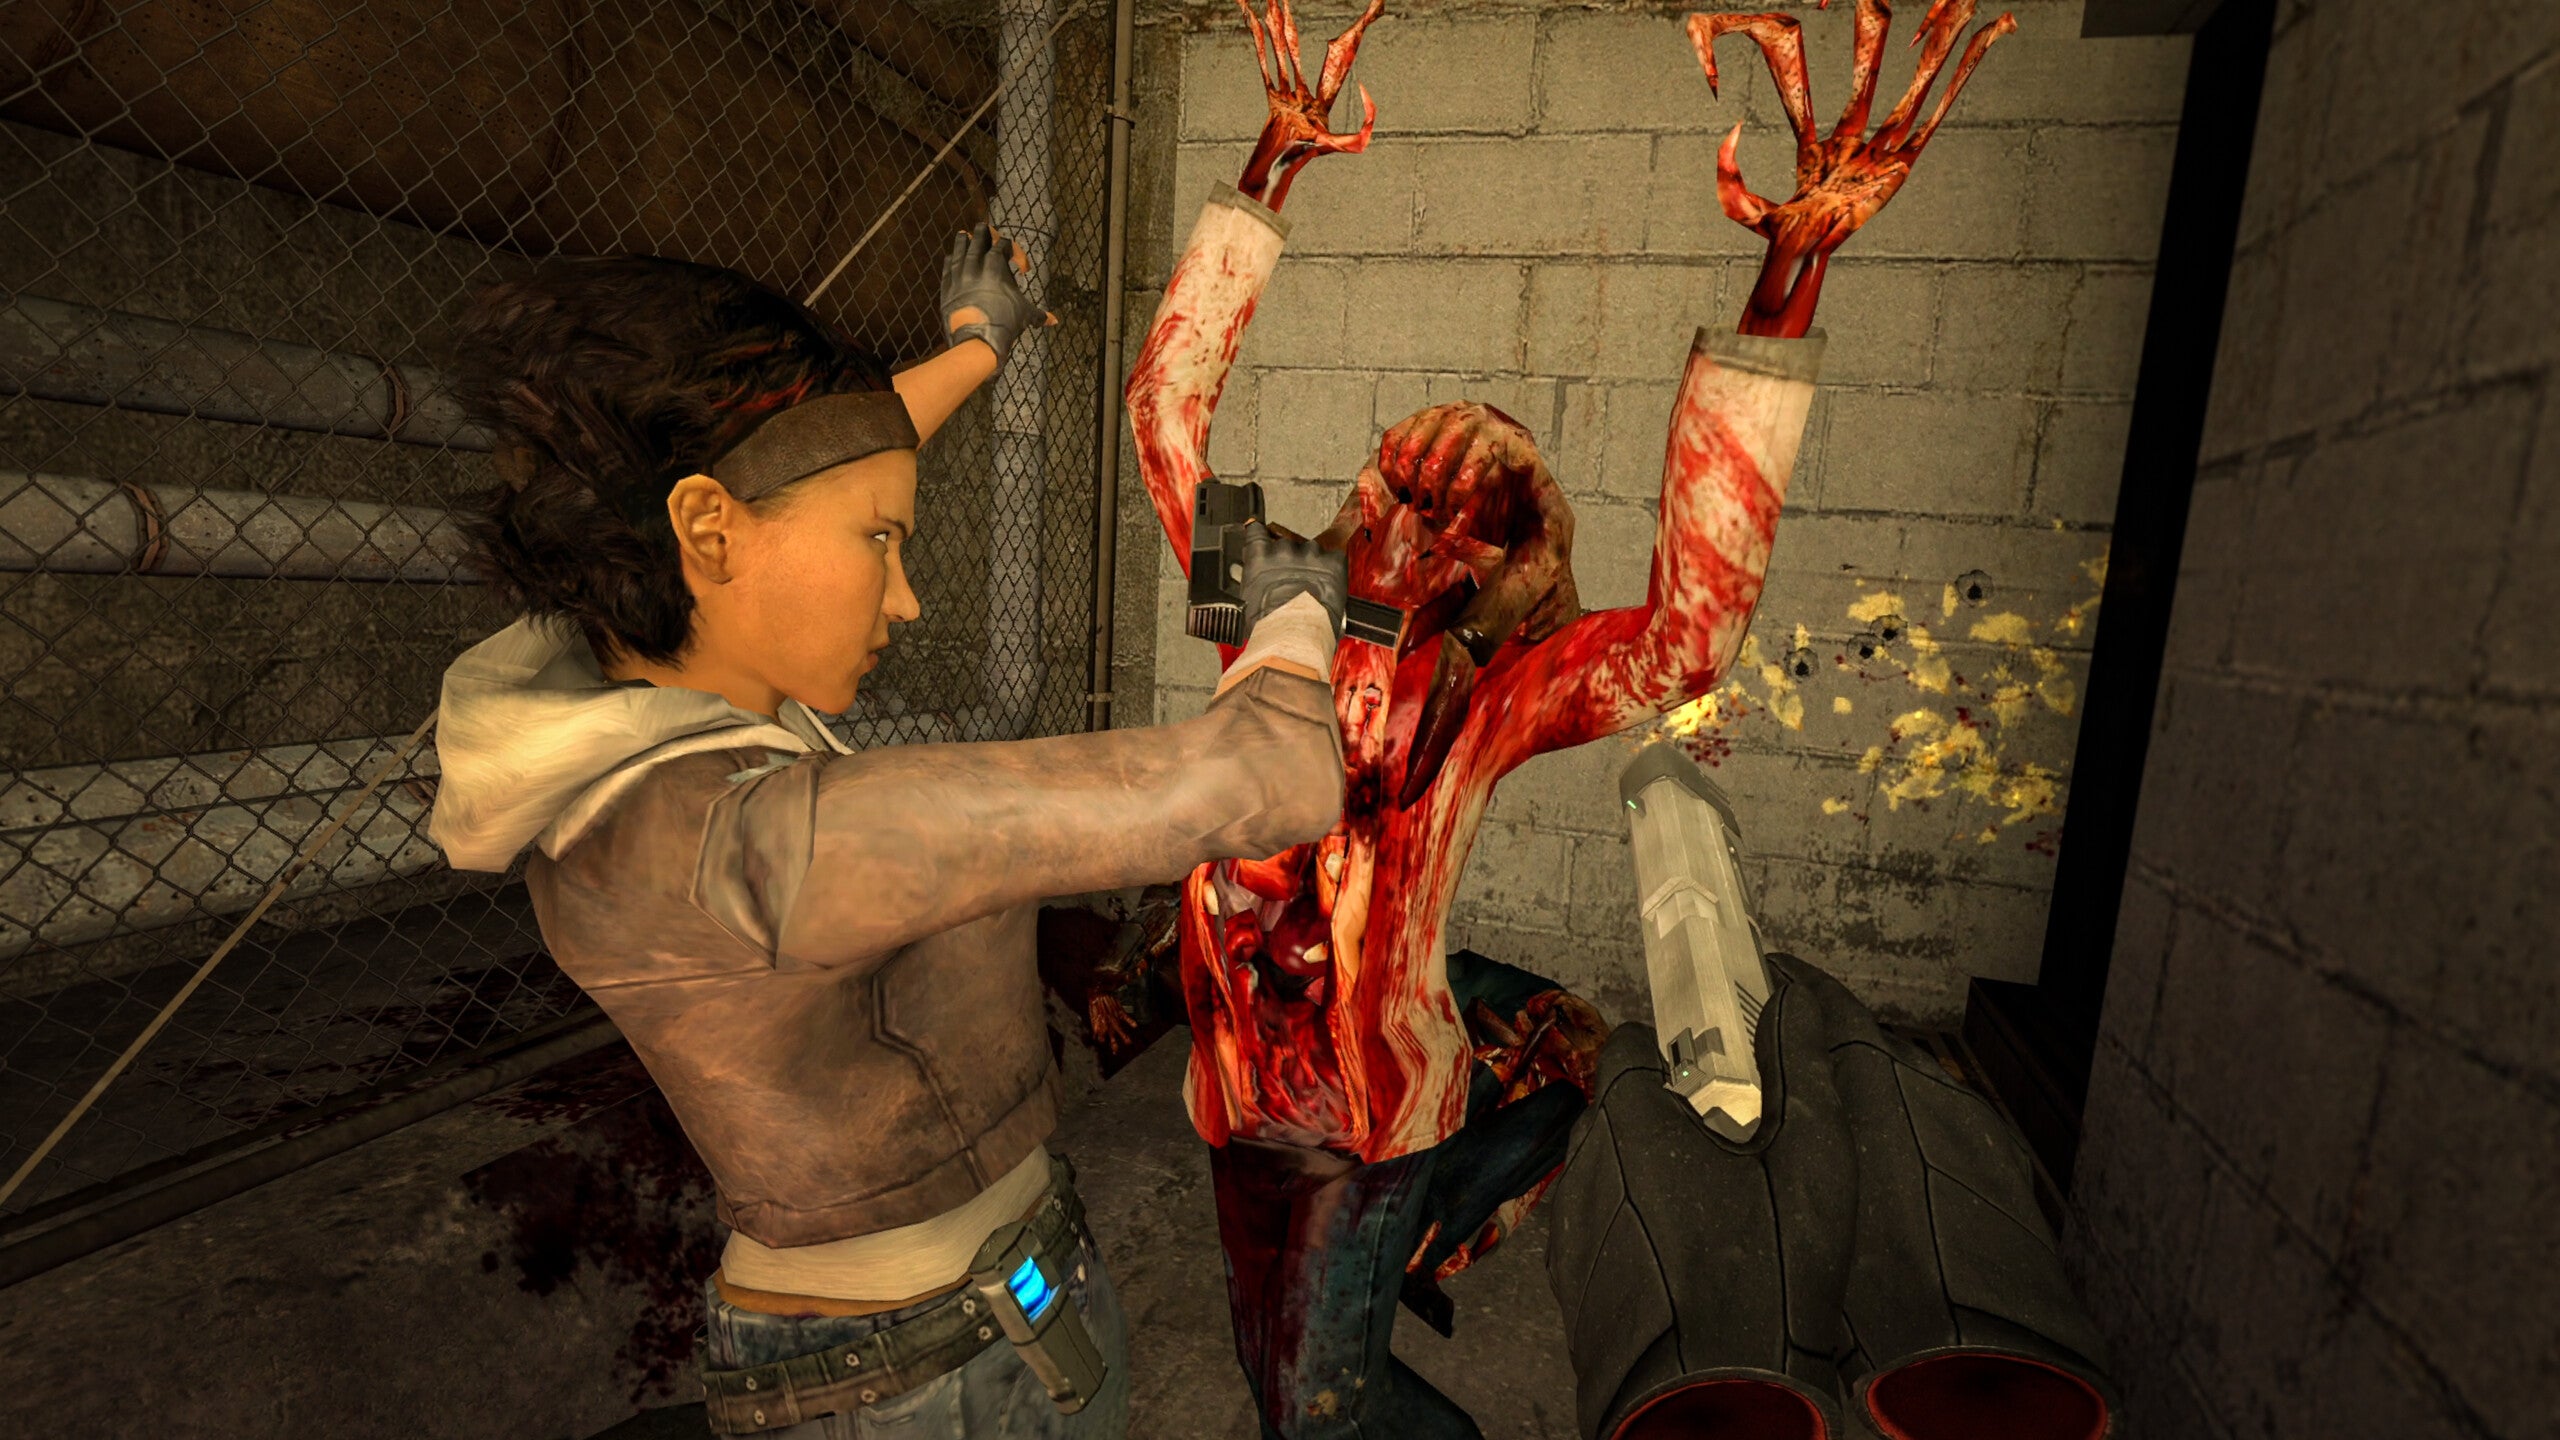 Alyx Vance attacks a zombie and headcrab in Half-Life 2: Episode One VR mod